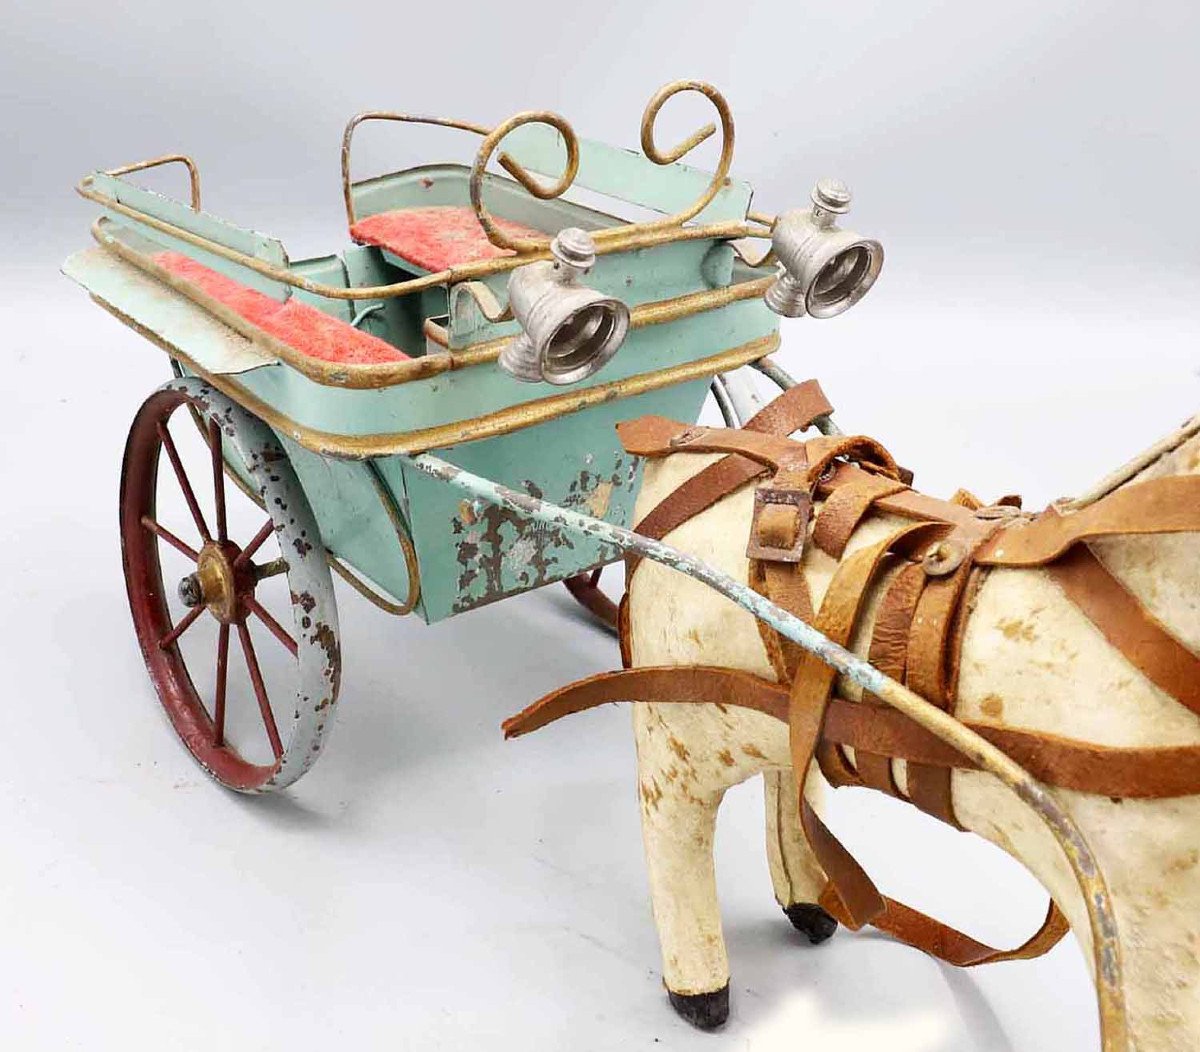 French Toy Carriole Around 1880 - 1900-photo-3